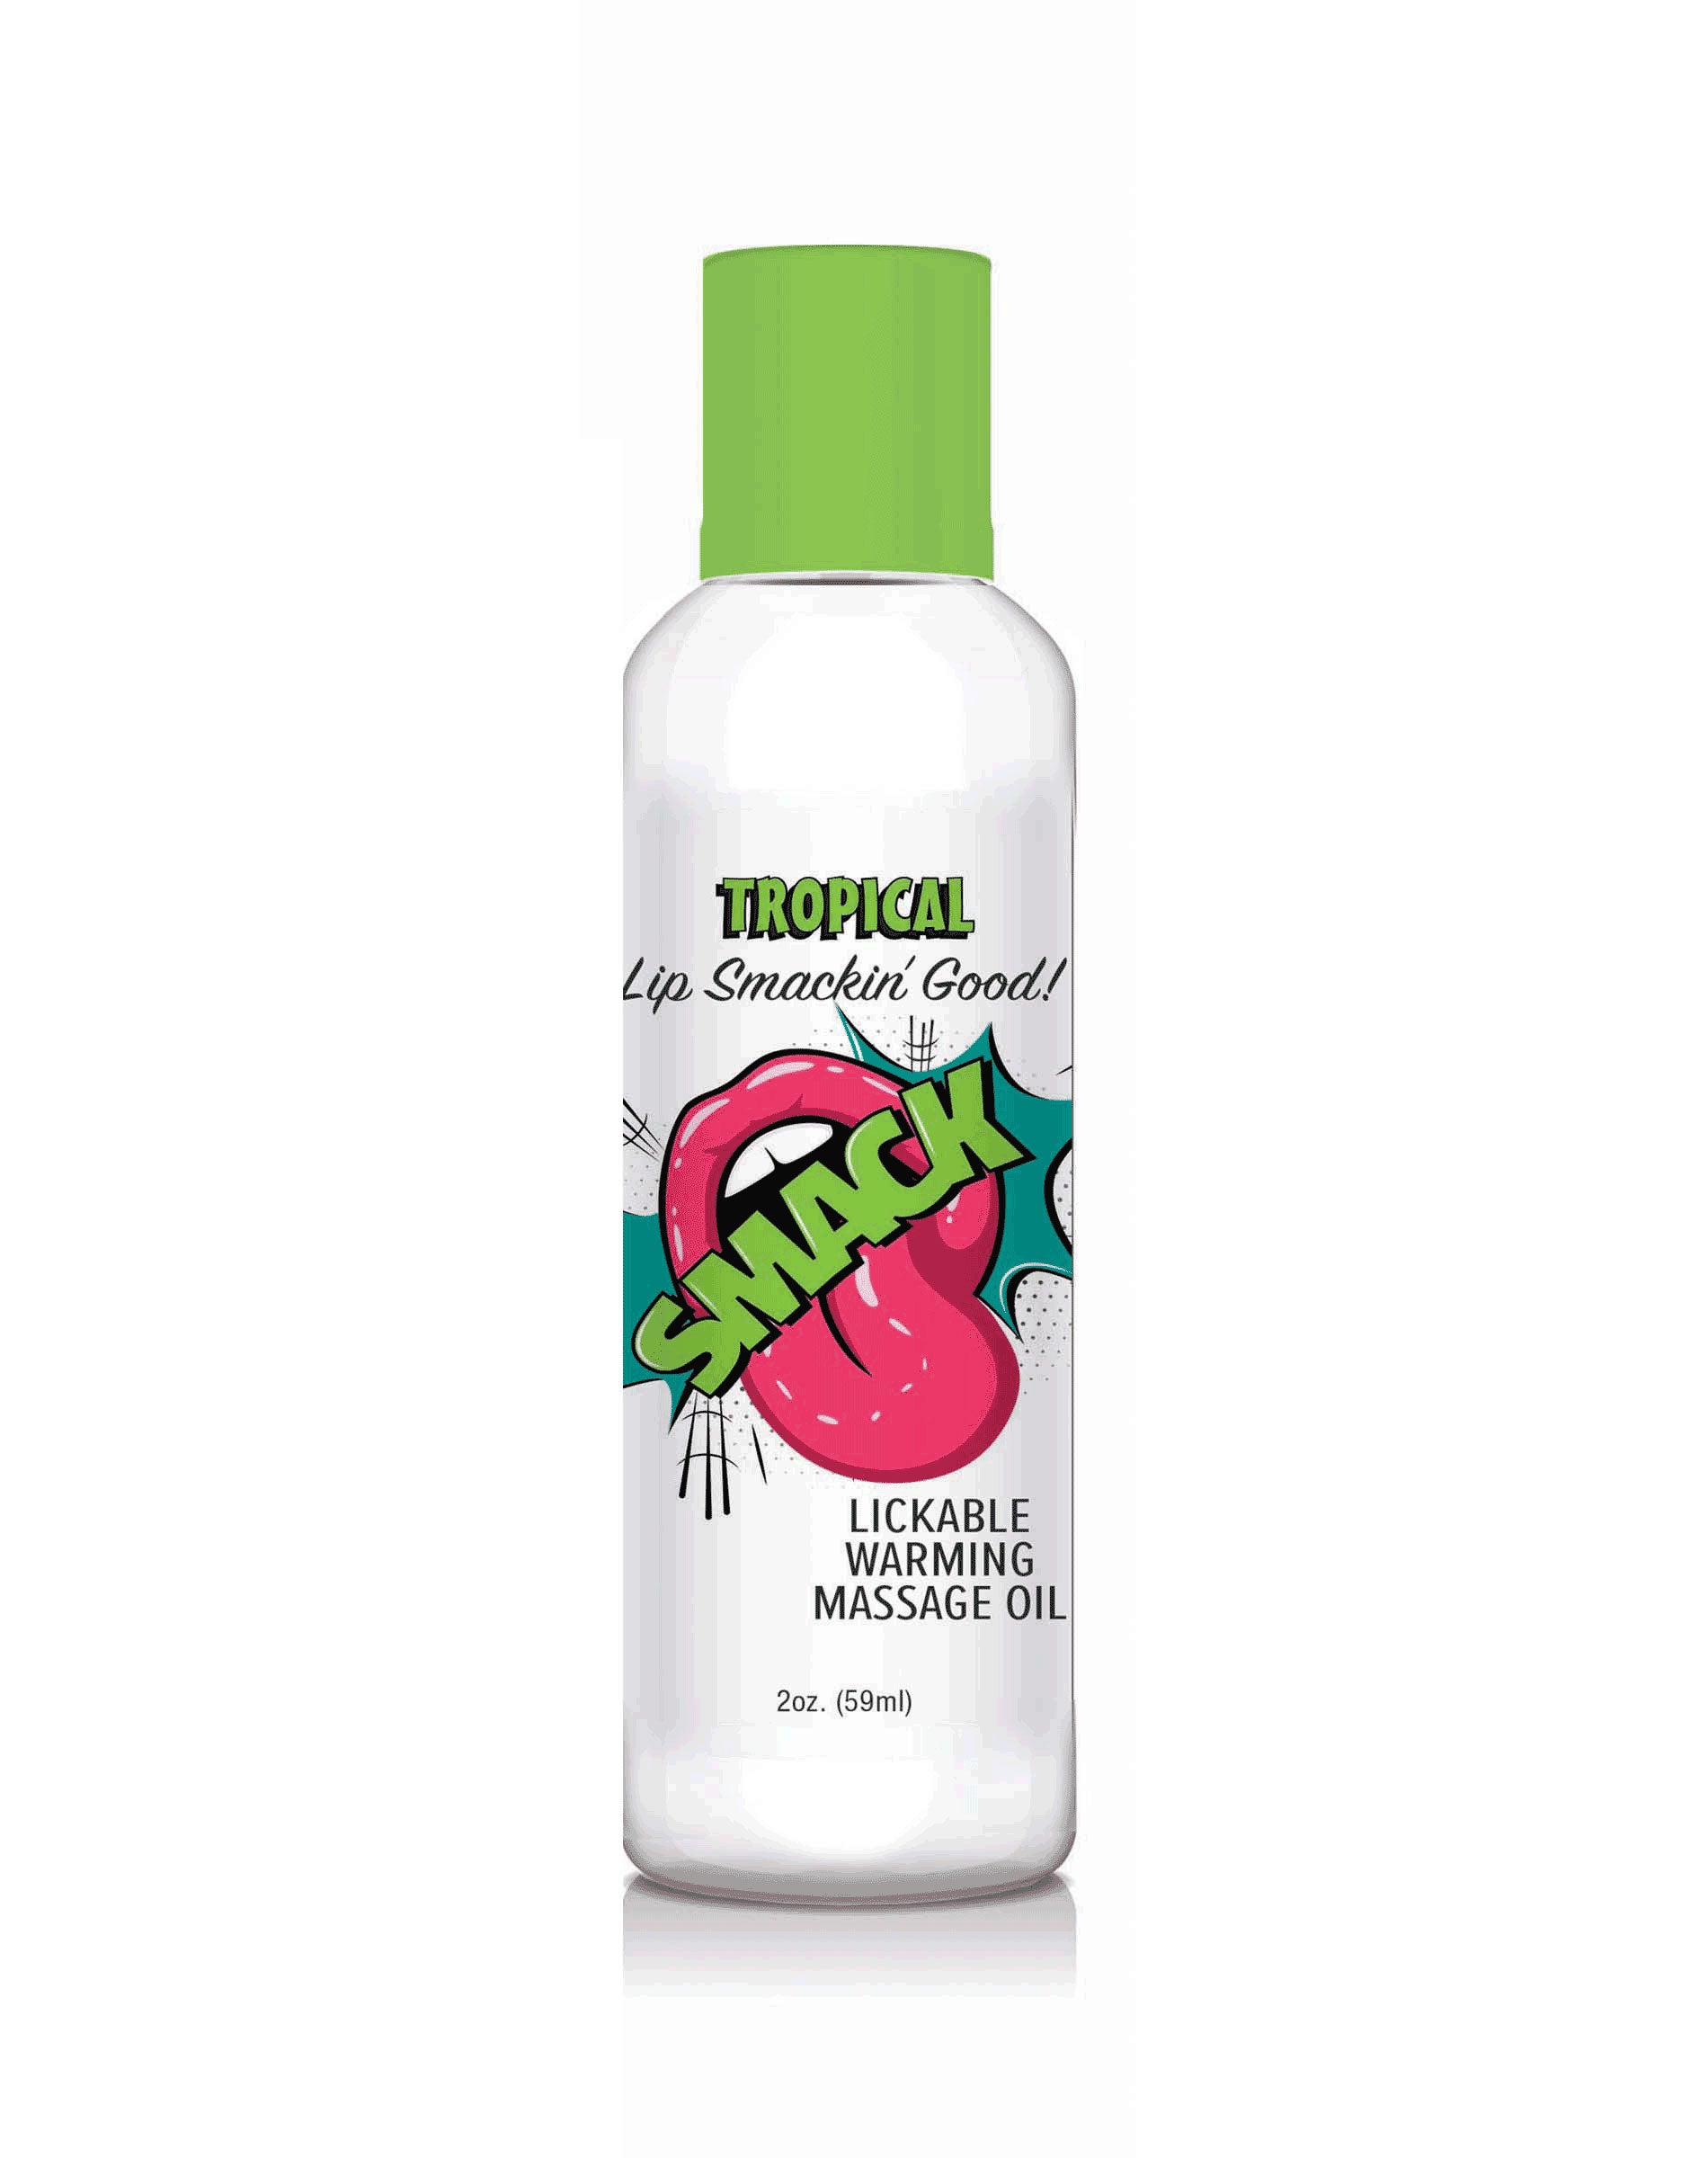 Smack Warming and Lickable Massage Oil - Tropical  2 Oz-1